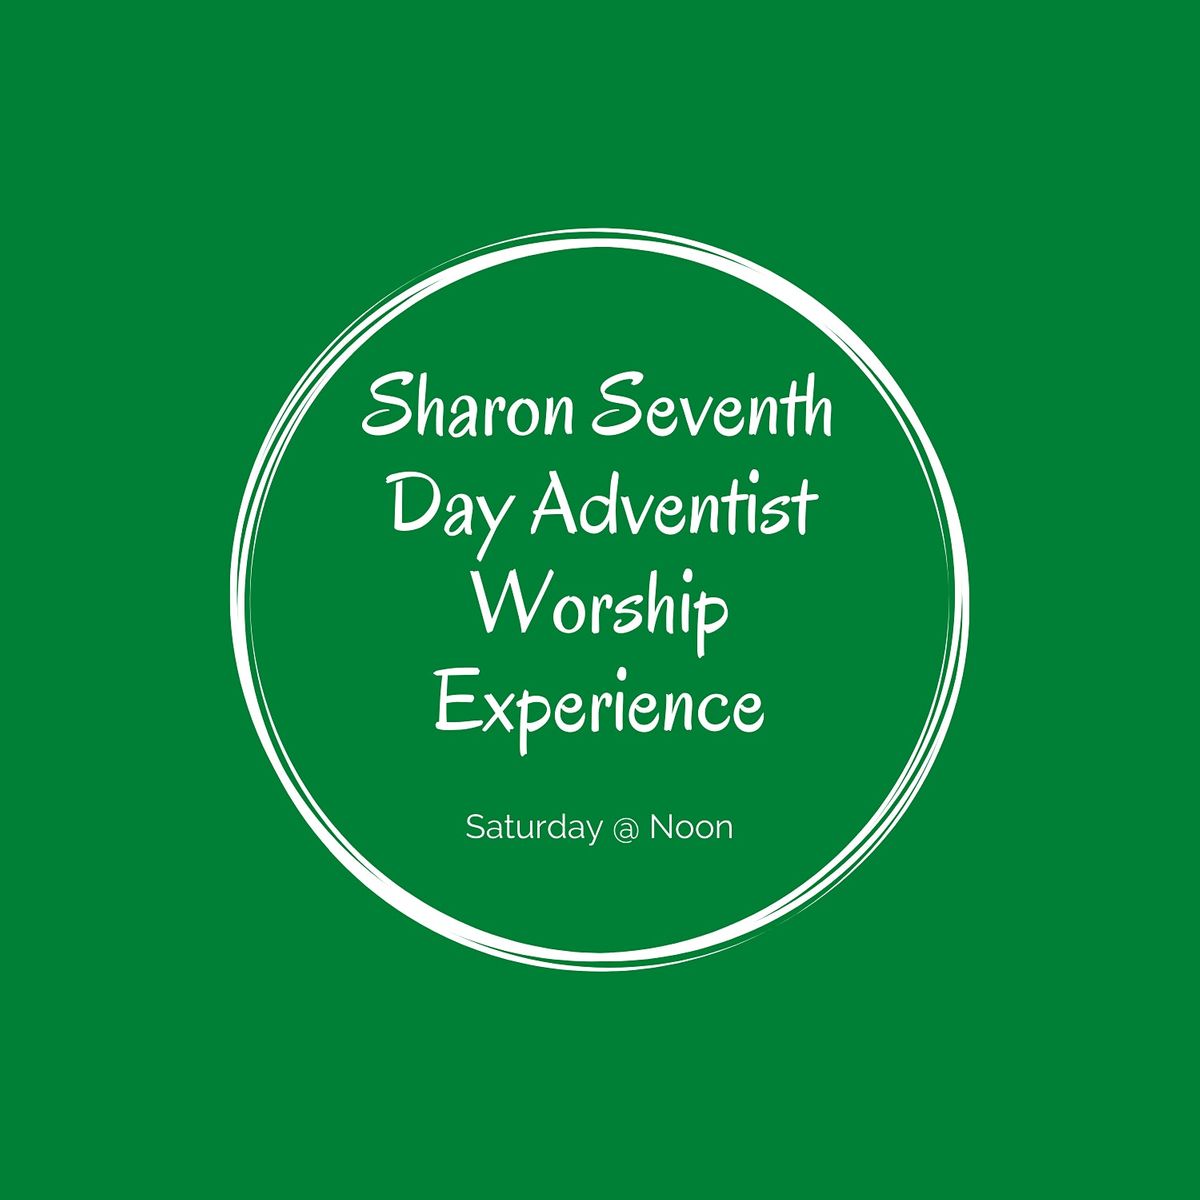 August 7, 2021 Sharon Seventh Day Adventist Worship Experience